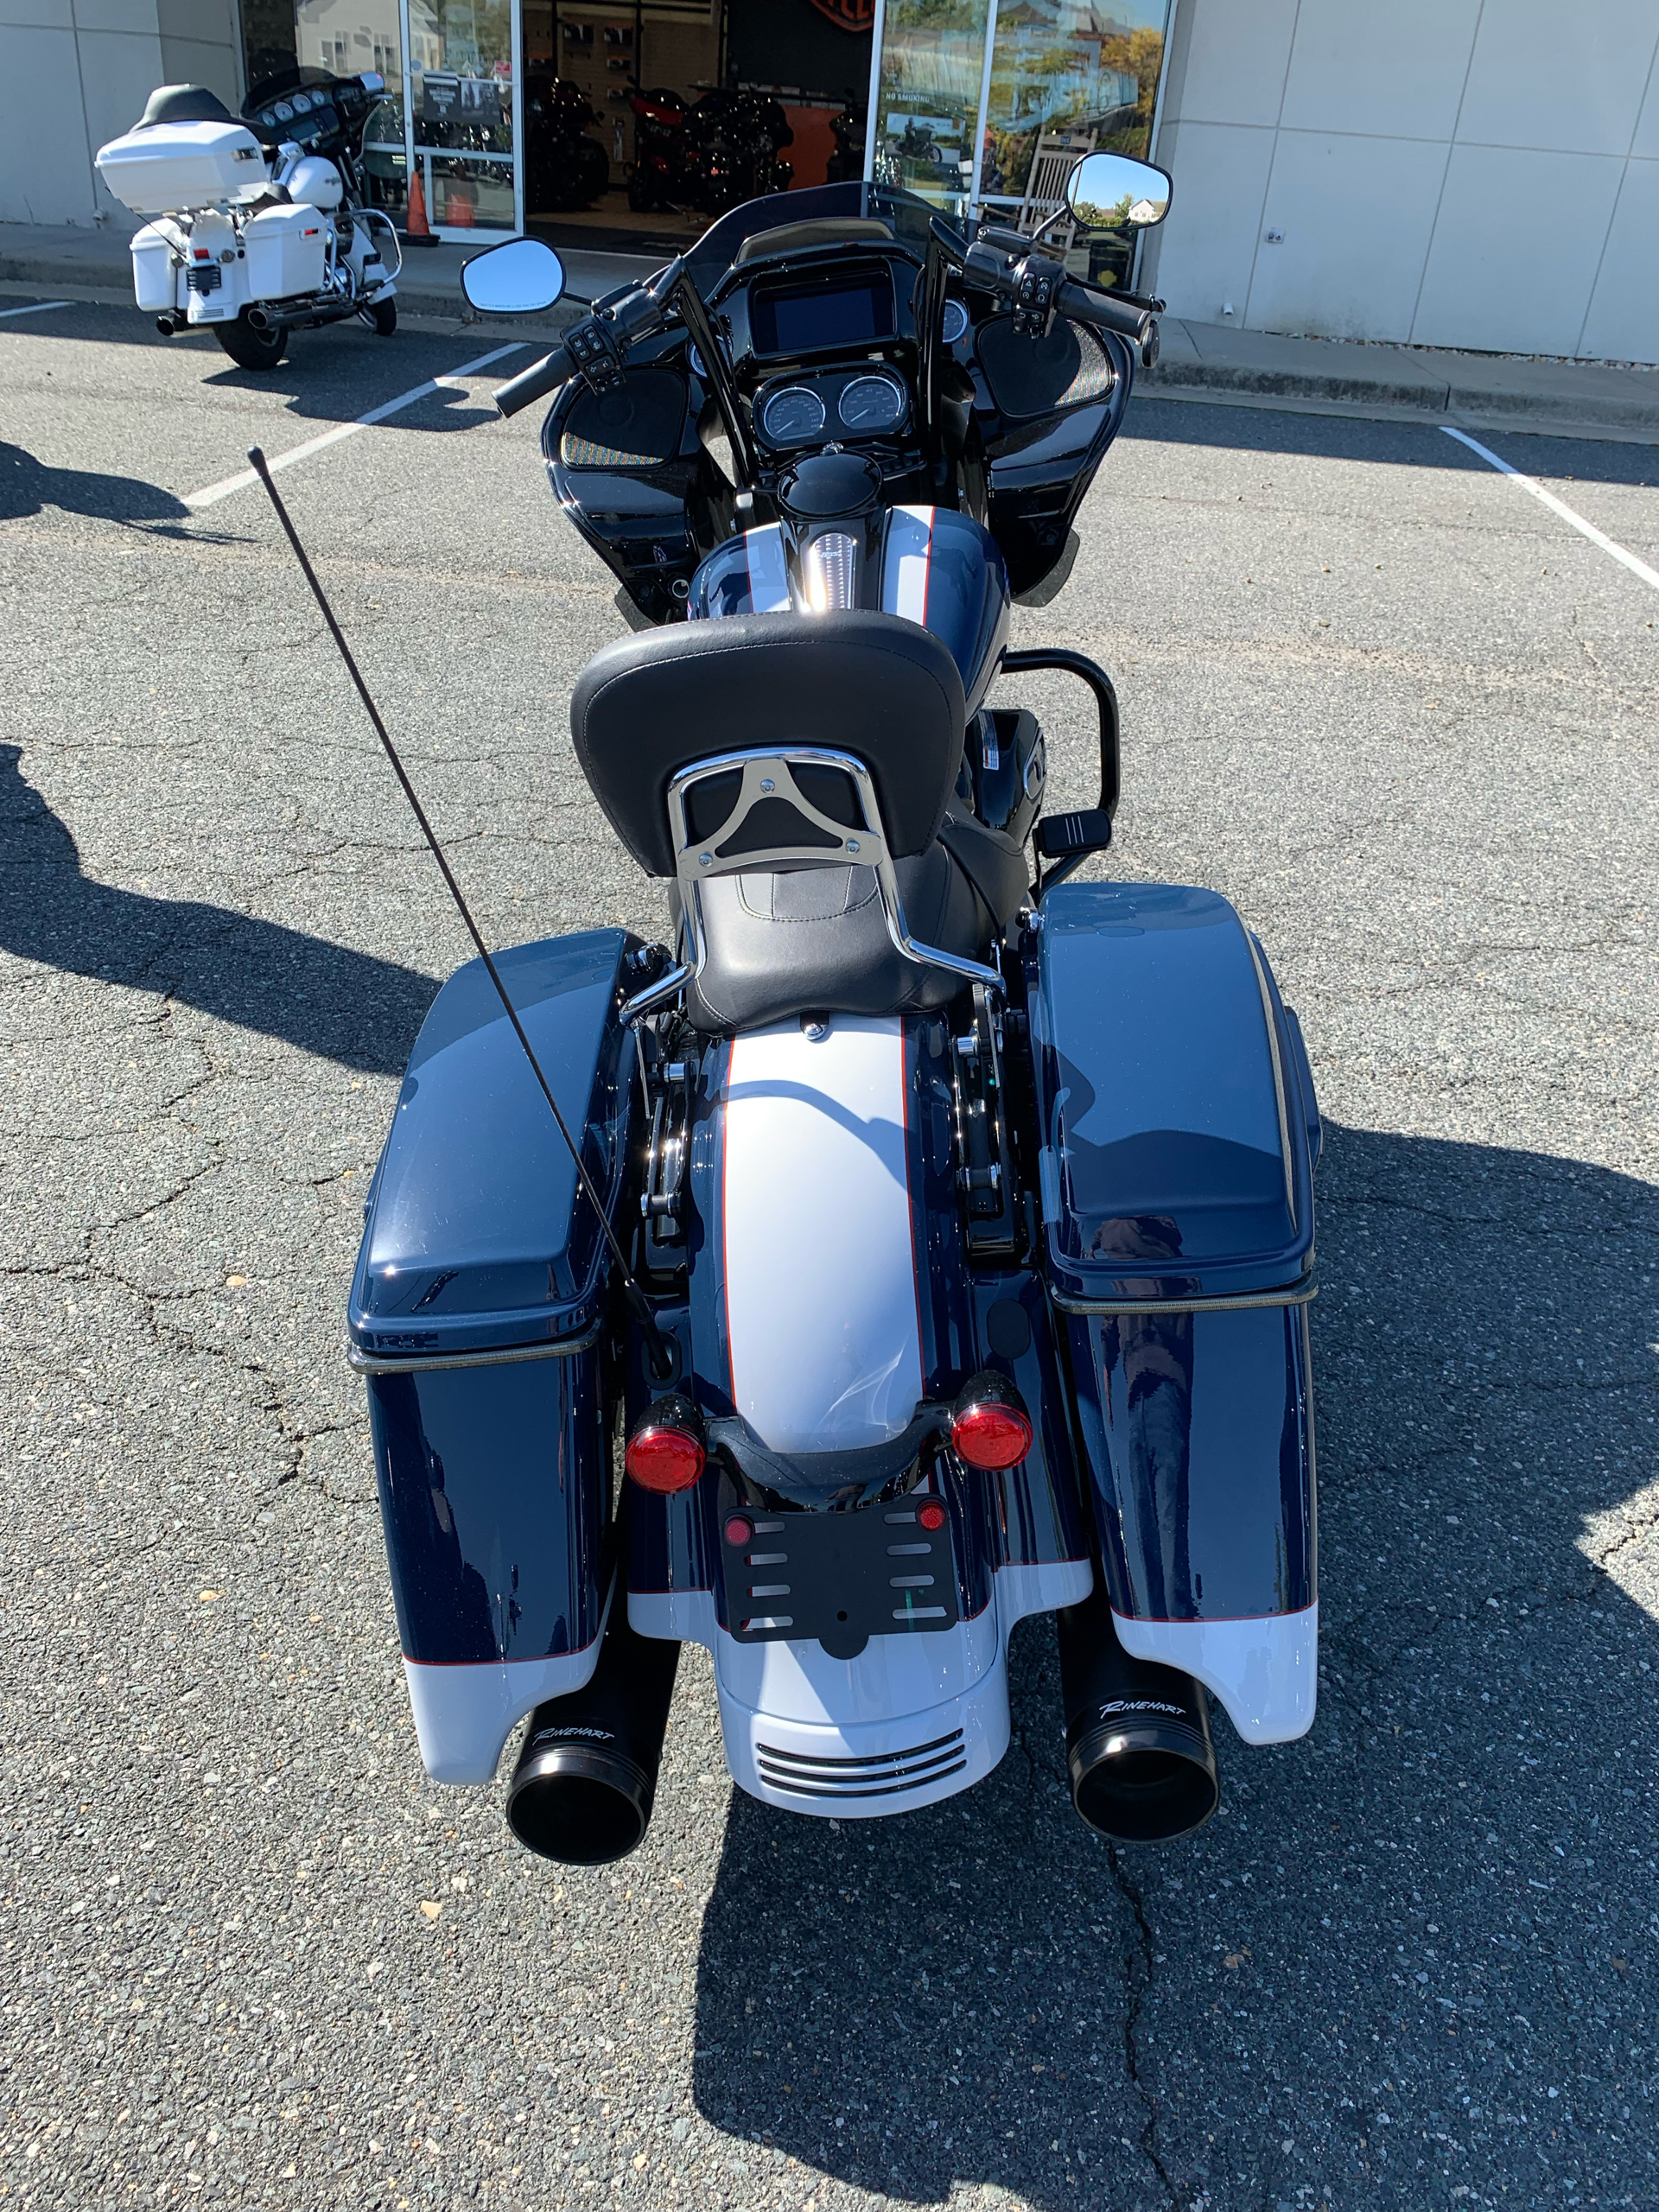 2020 Harley-Davidson Road Glide Special in Dumfries, Virginia - Photo 5